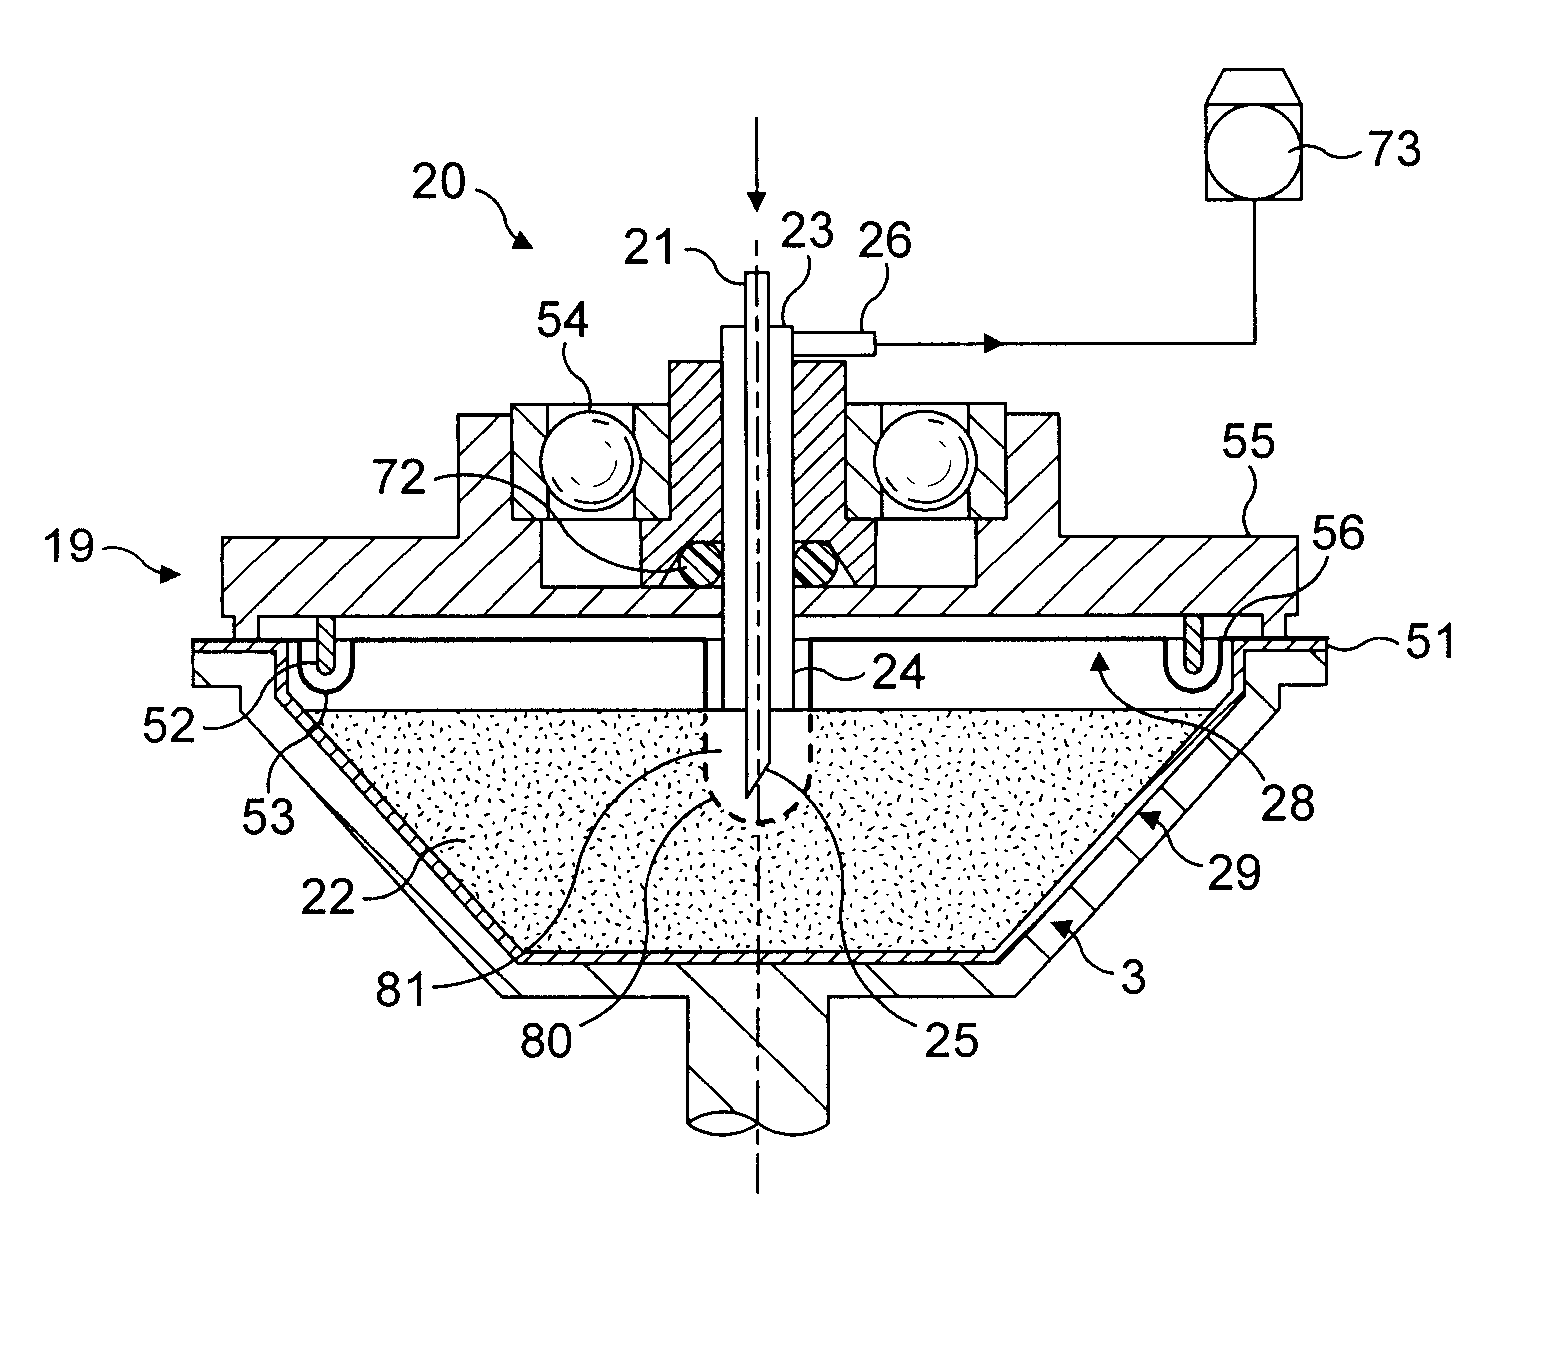 Method and system for preparing a liquid extract from a cell using centrifugal forces